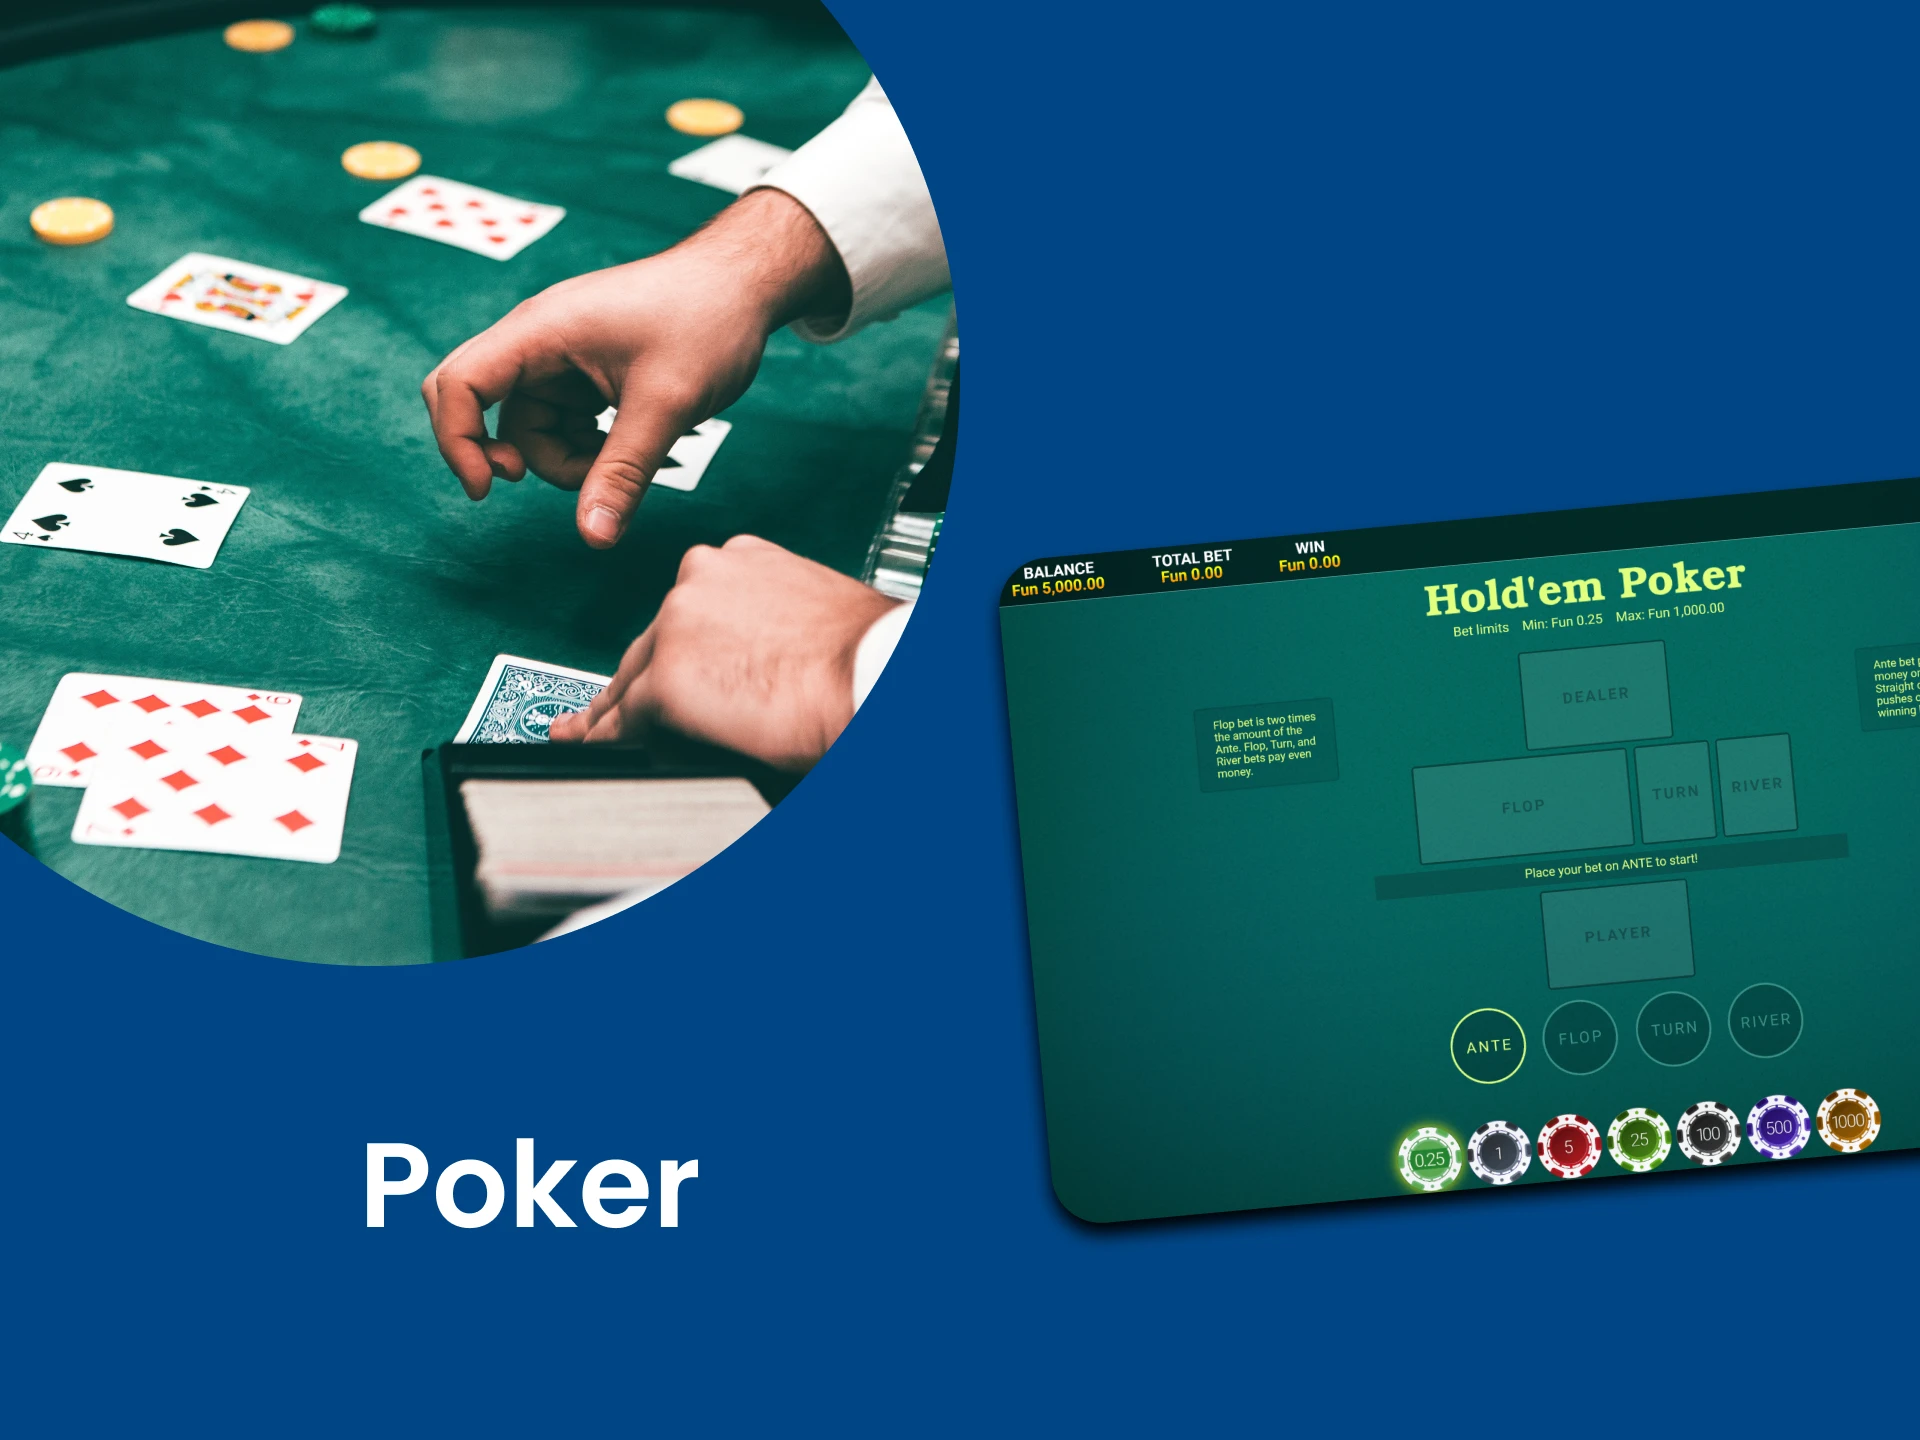 Select the Poker section for casino games.